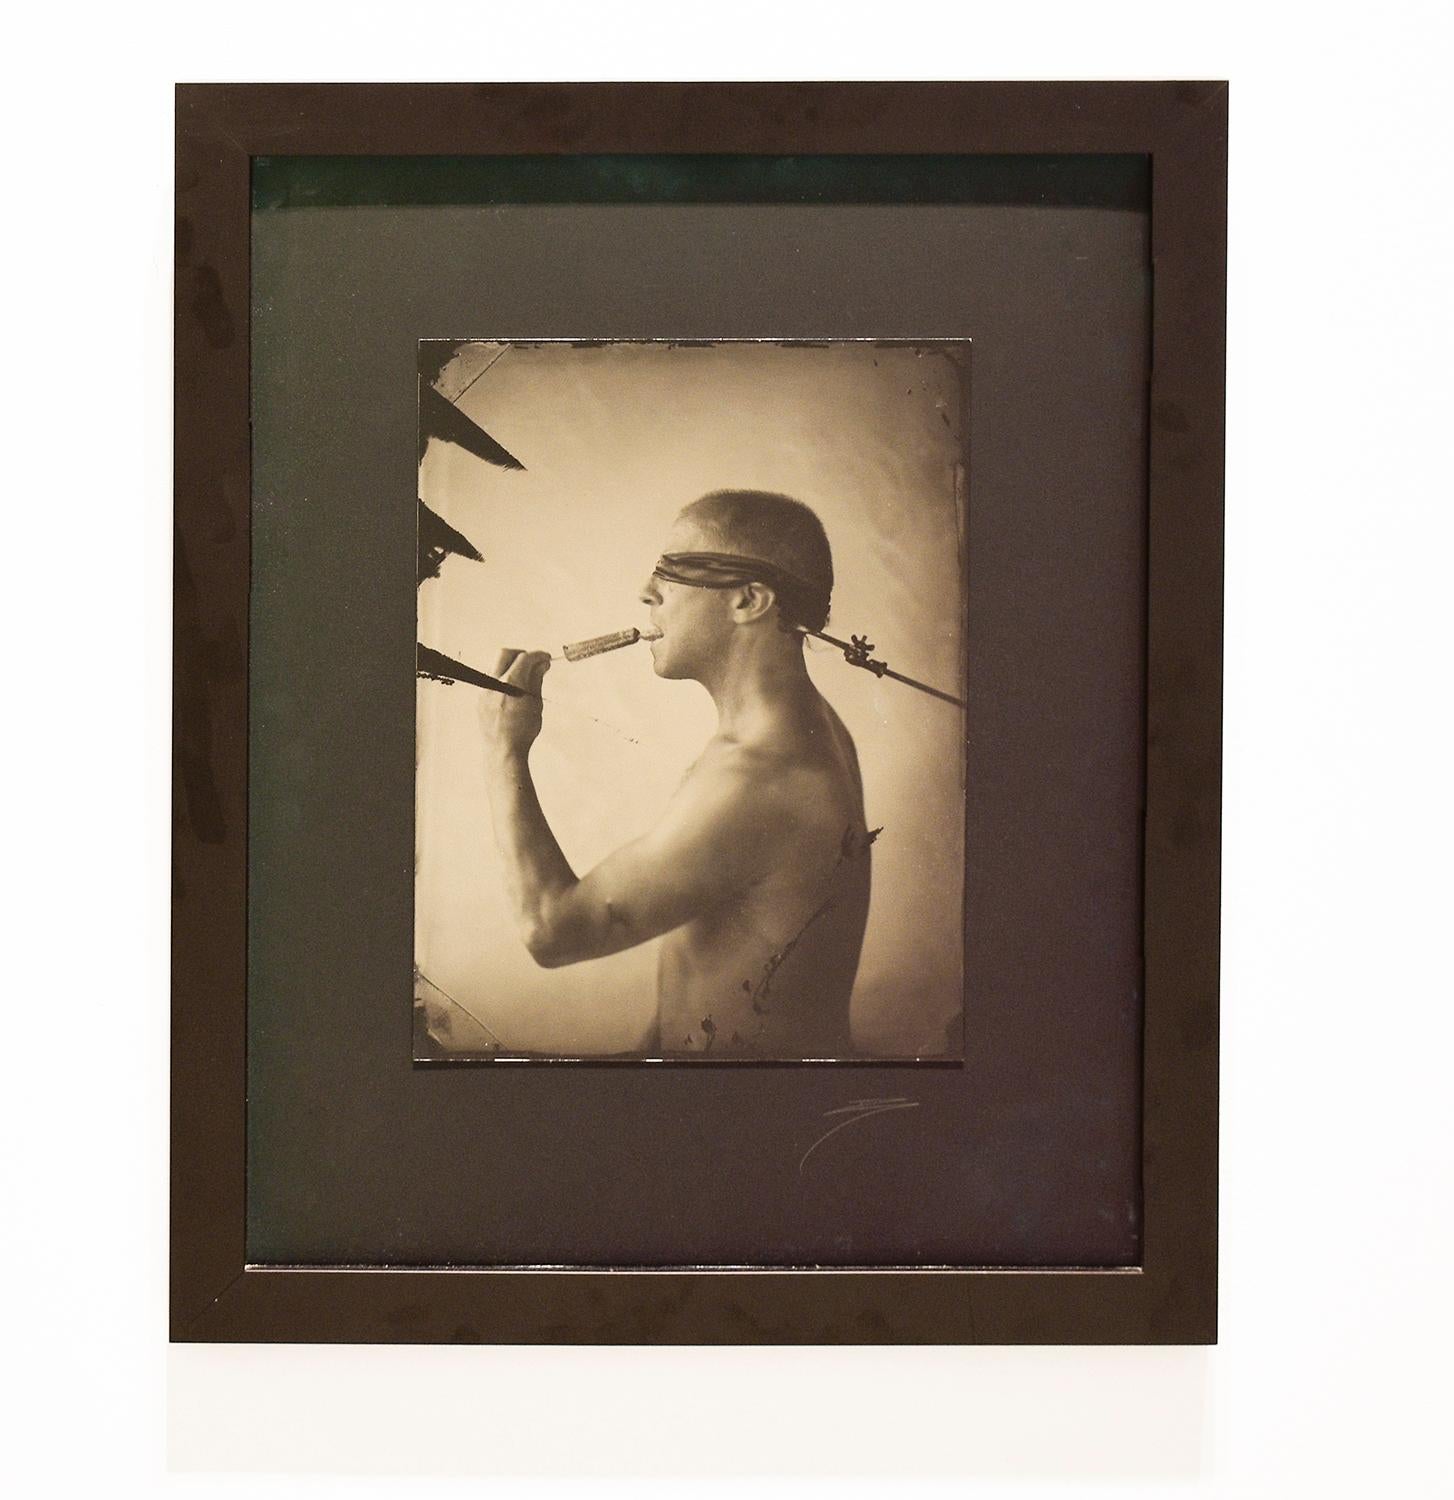 Linguist (Salacious Tin Type Photo of Male Nude Licking an Ice Pop, blindfolded) - Photograph by David Sokosh